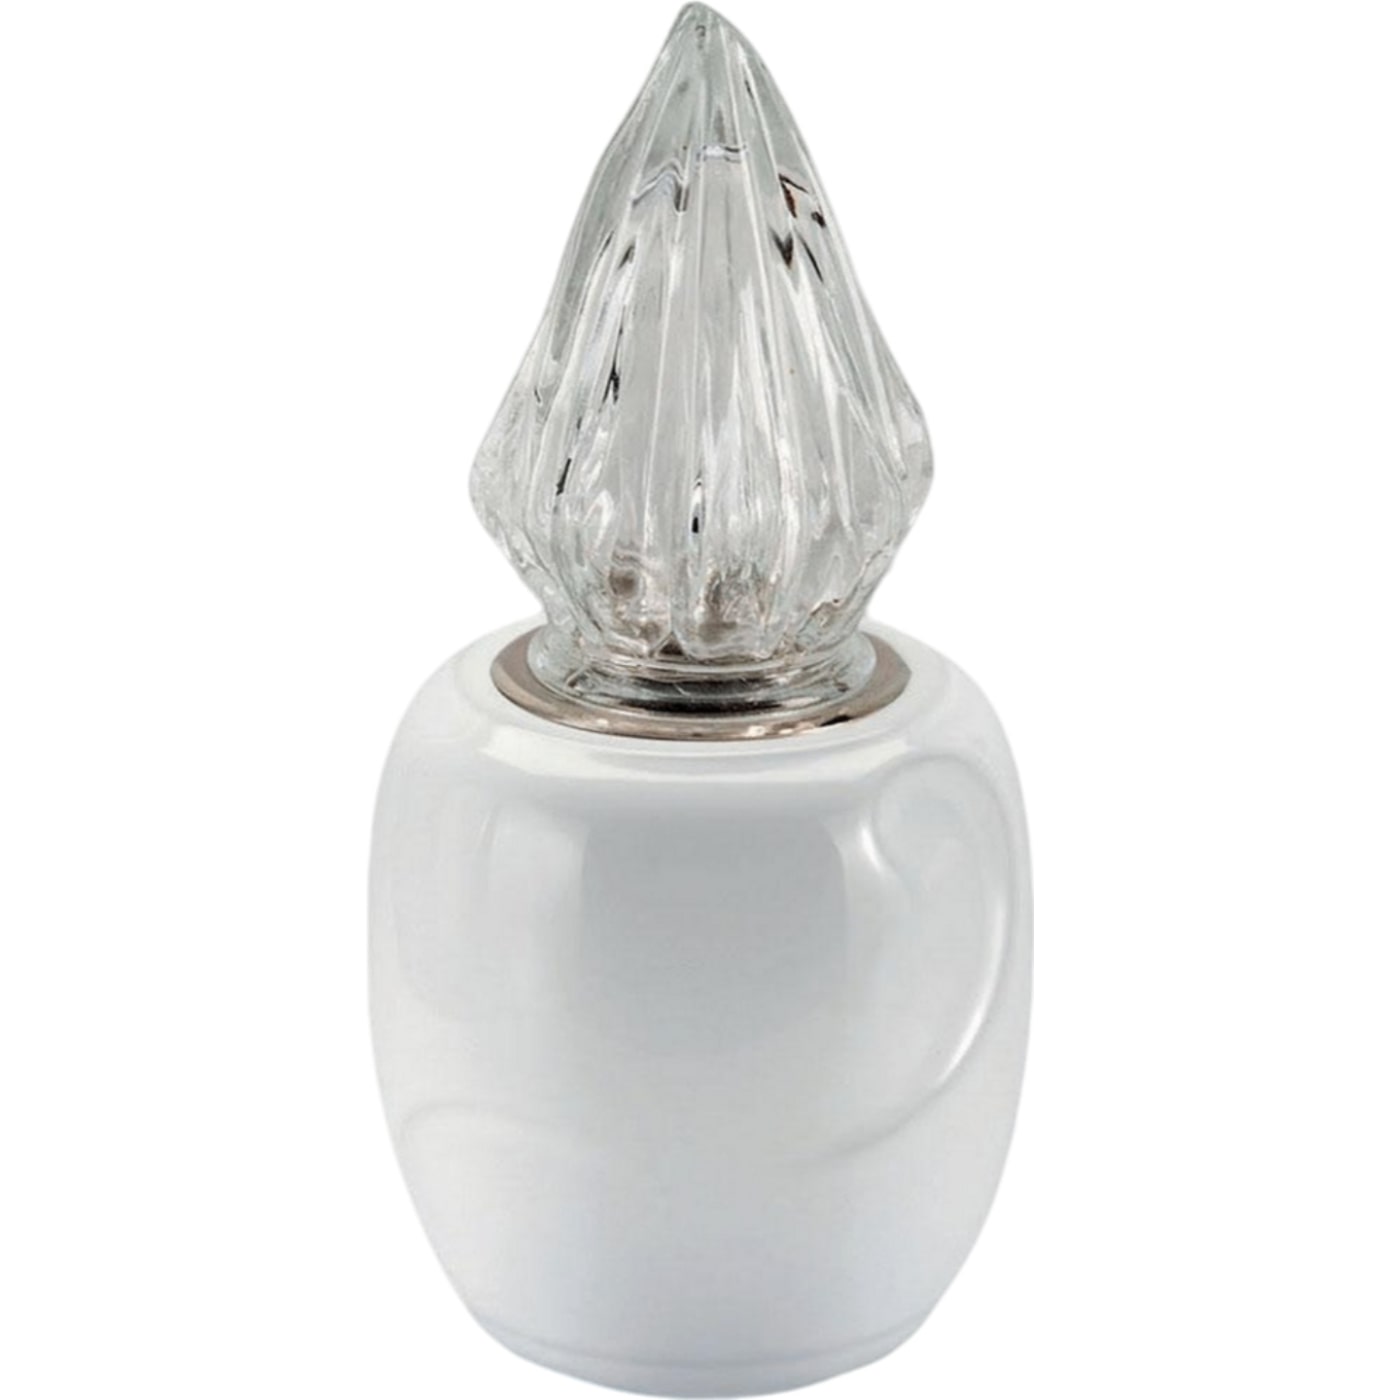 Grave light Sharon 10x10cm - 3.9x3.9in In white porcelain, wall attached SH126P